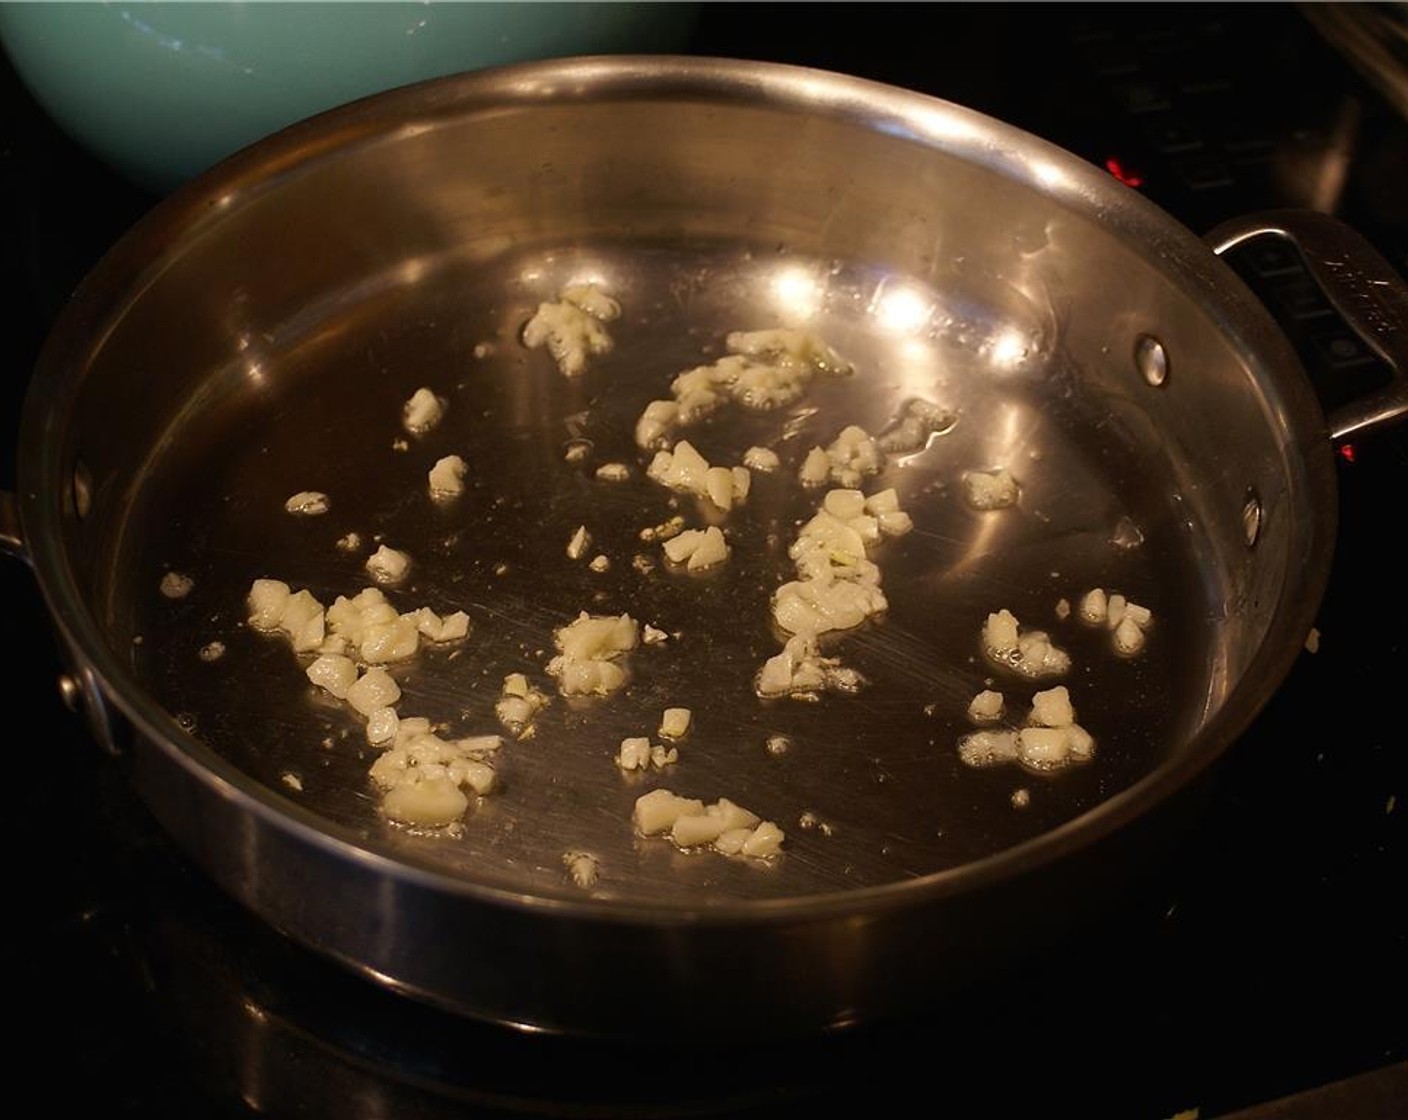 step 4 Heat Coconut Oil (1 Tbsp) in a pan over medium heat.  Add the Garlic (3 cloves) and sauté until it is fragrant, about 30 seconds.